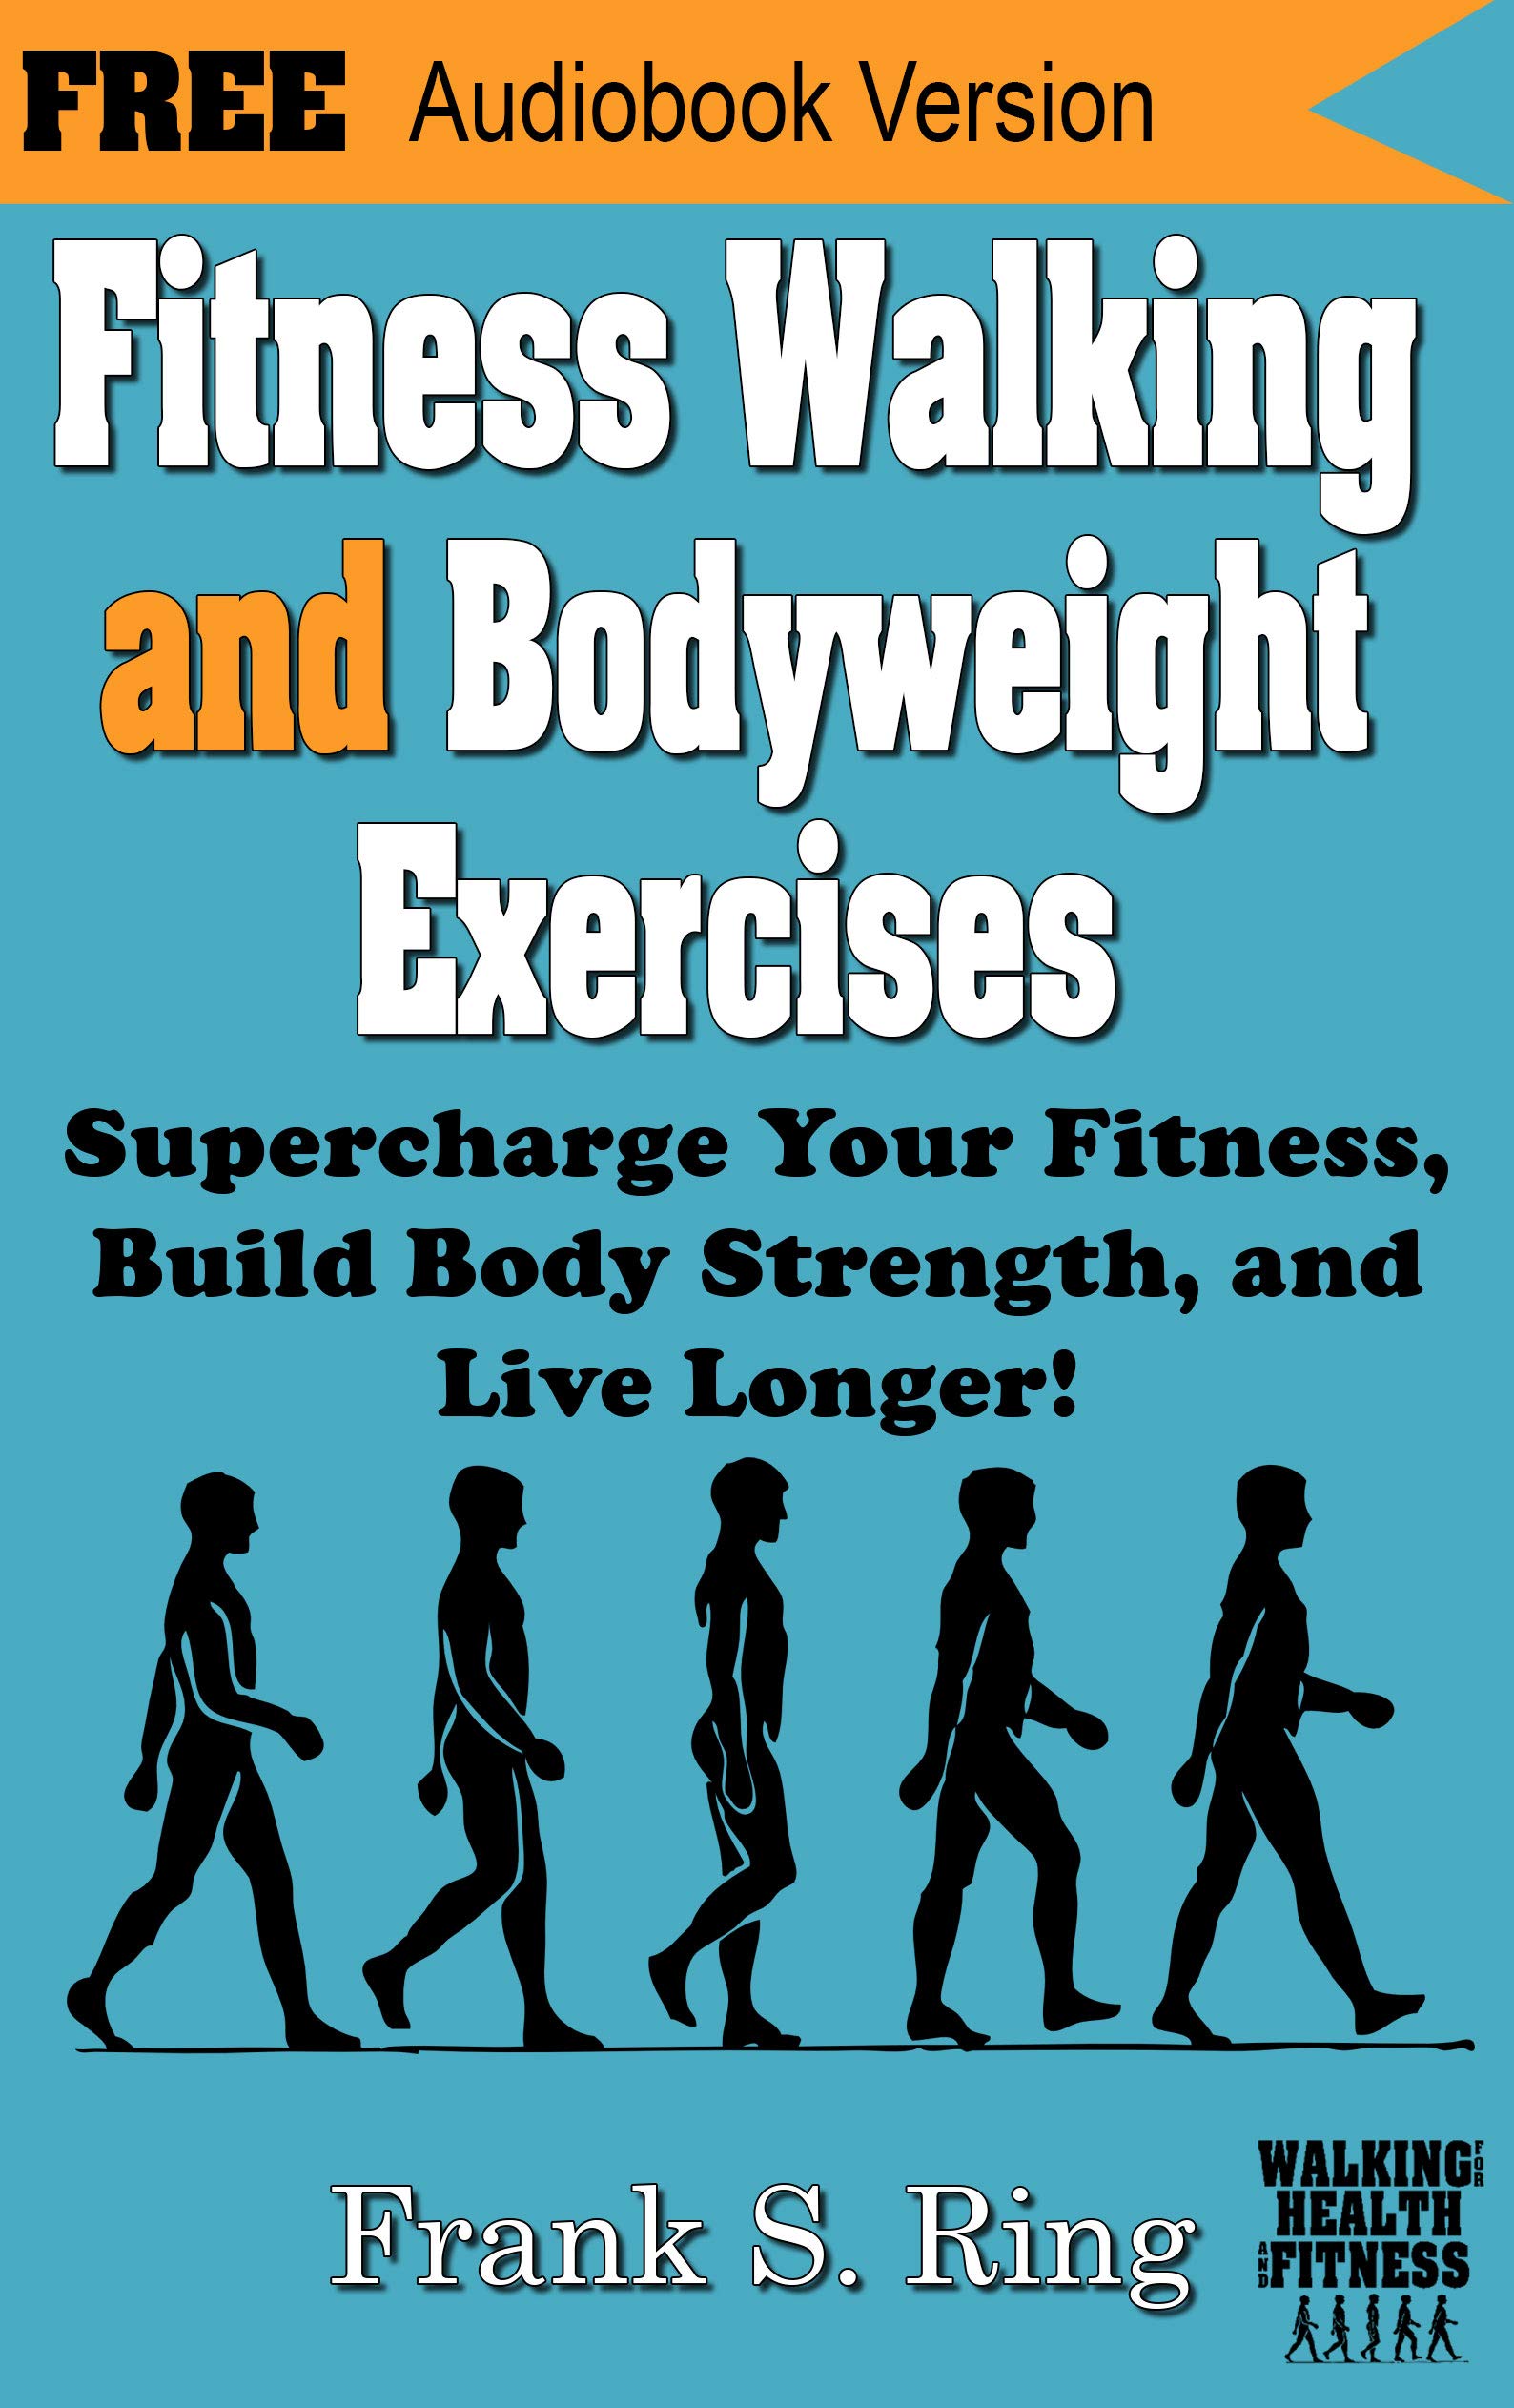 Fitness Walking and Bodyweight Exercises: Supercharge Your Fitness, Build Body Strength, and Live Longer (Walking for Health and Fitness Book 2)